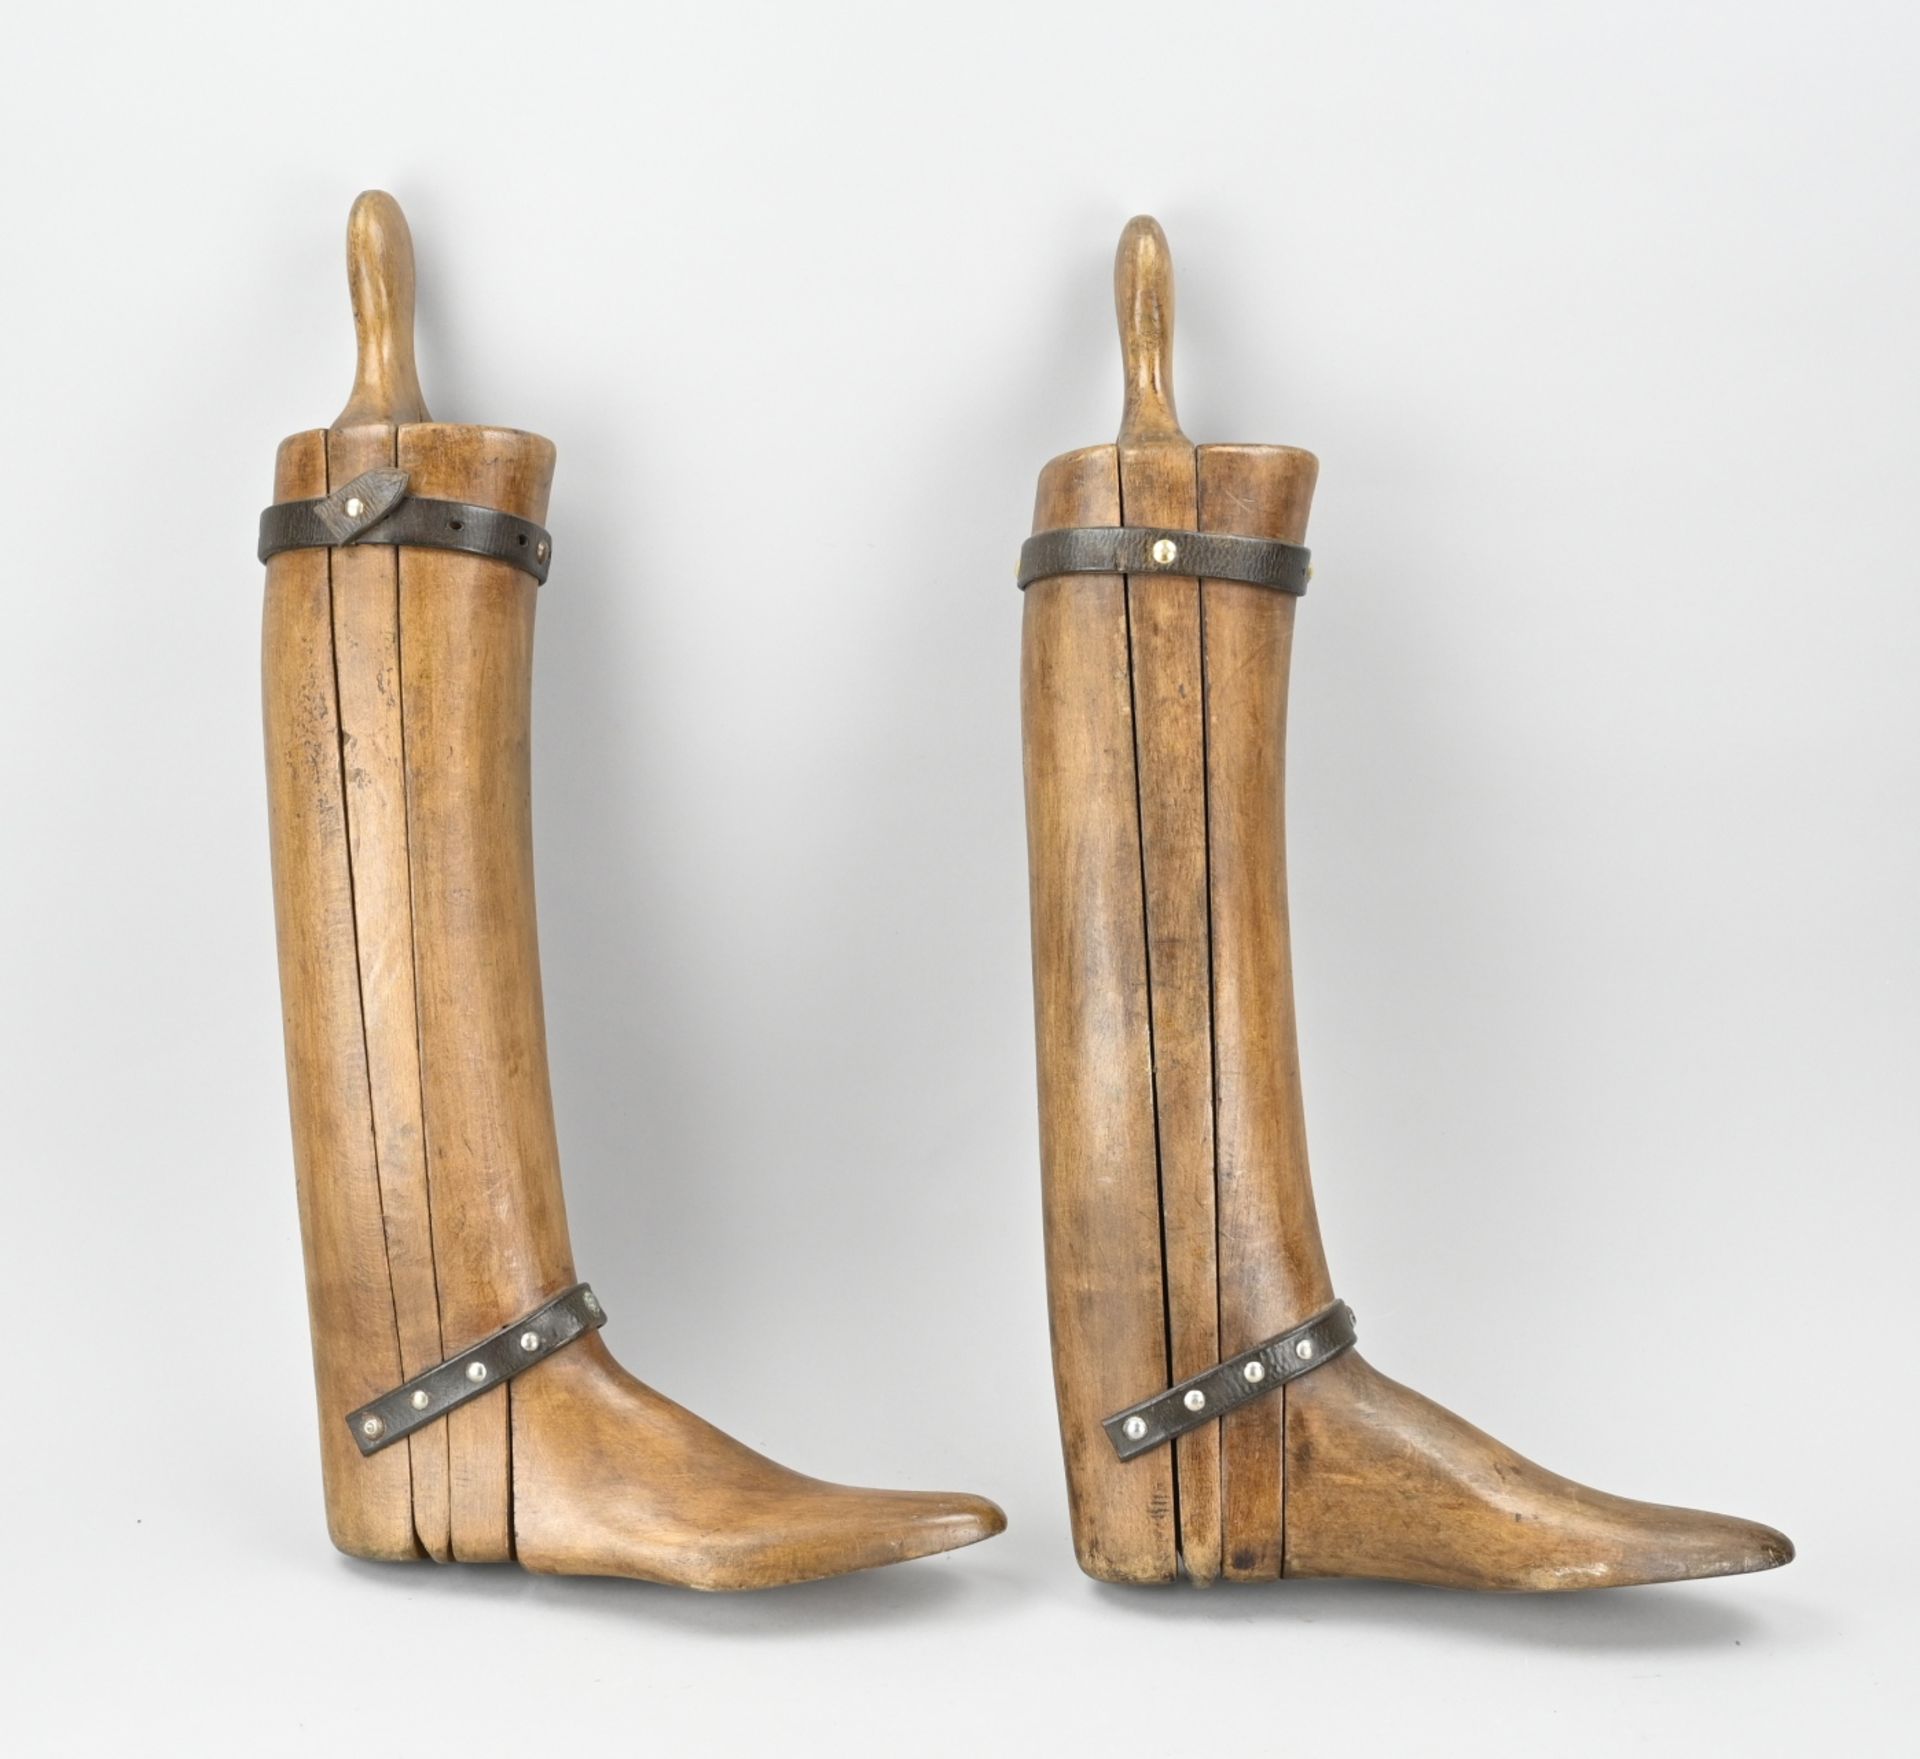 2x Antique wooden boot holders, 1900